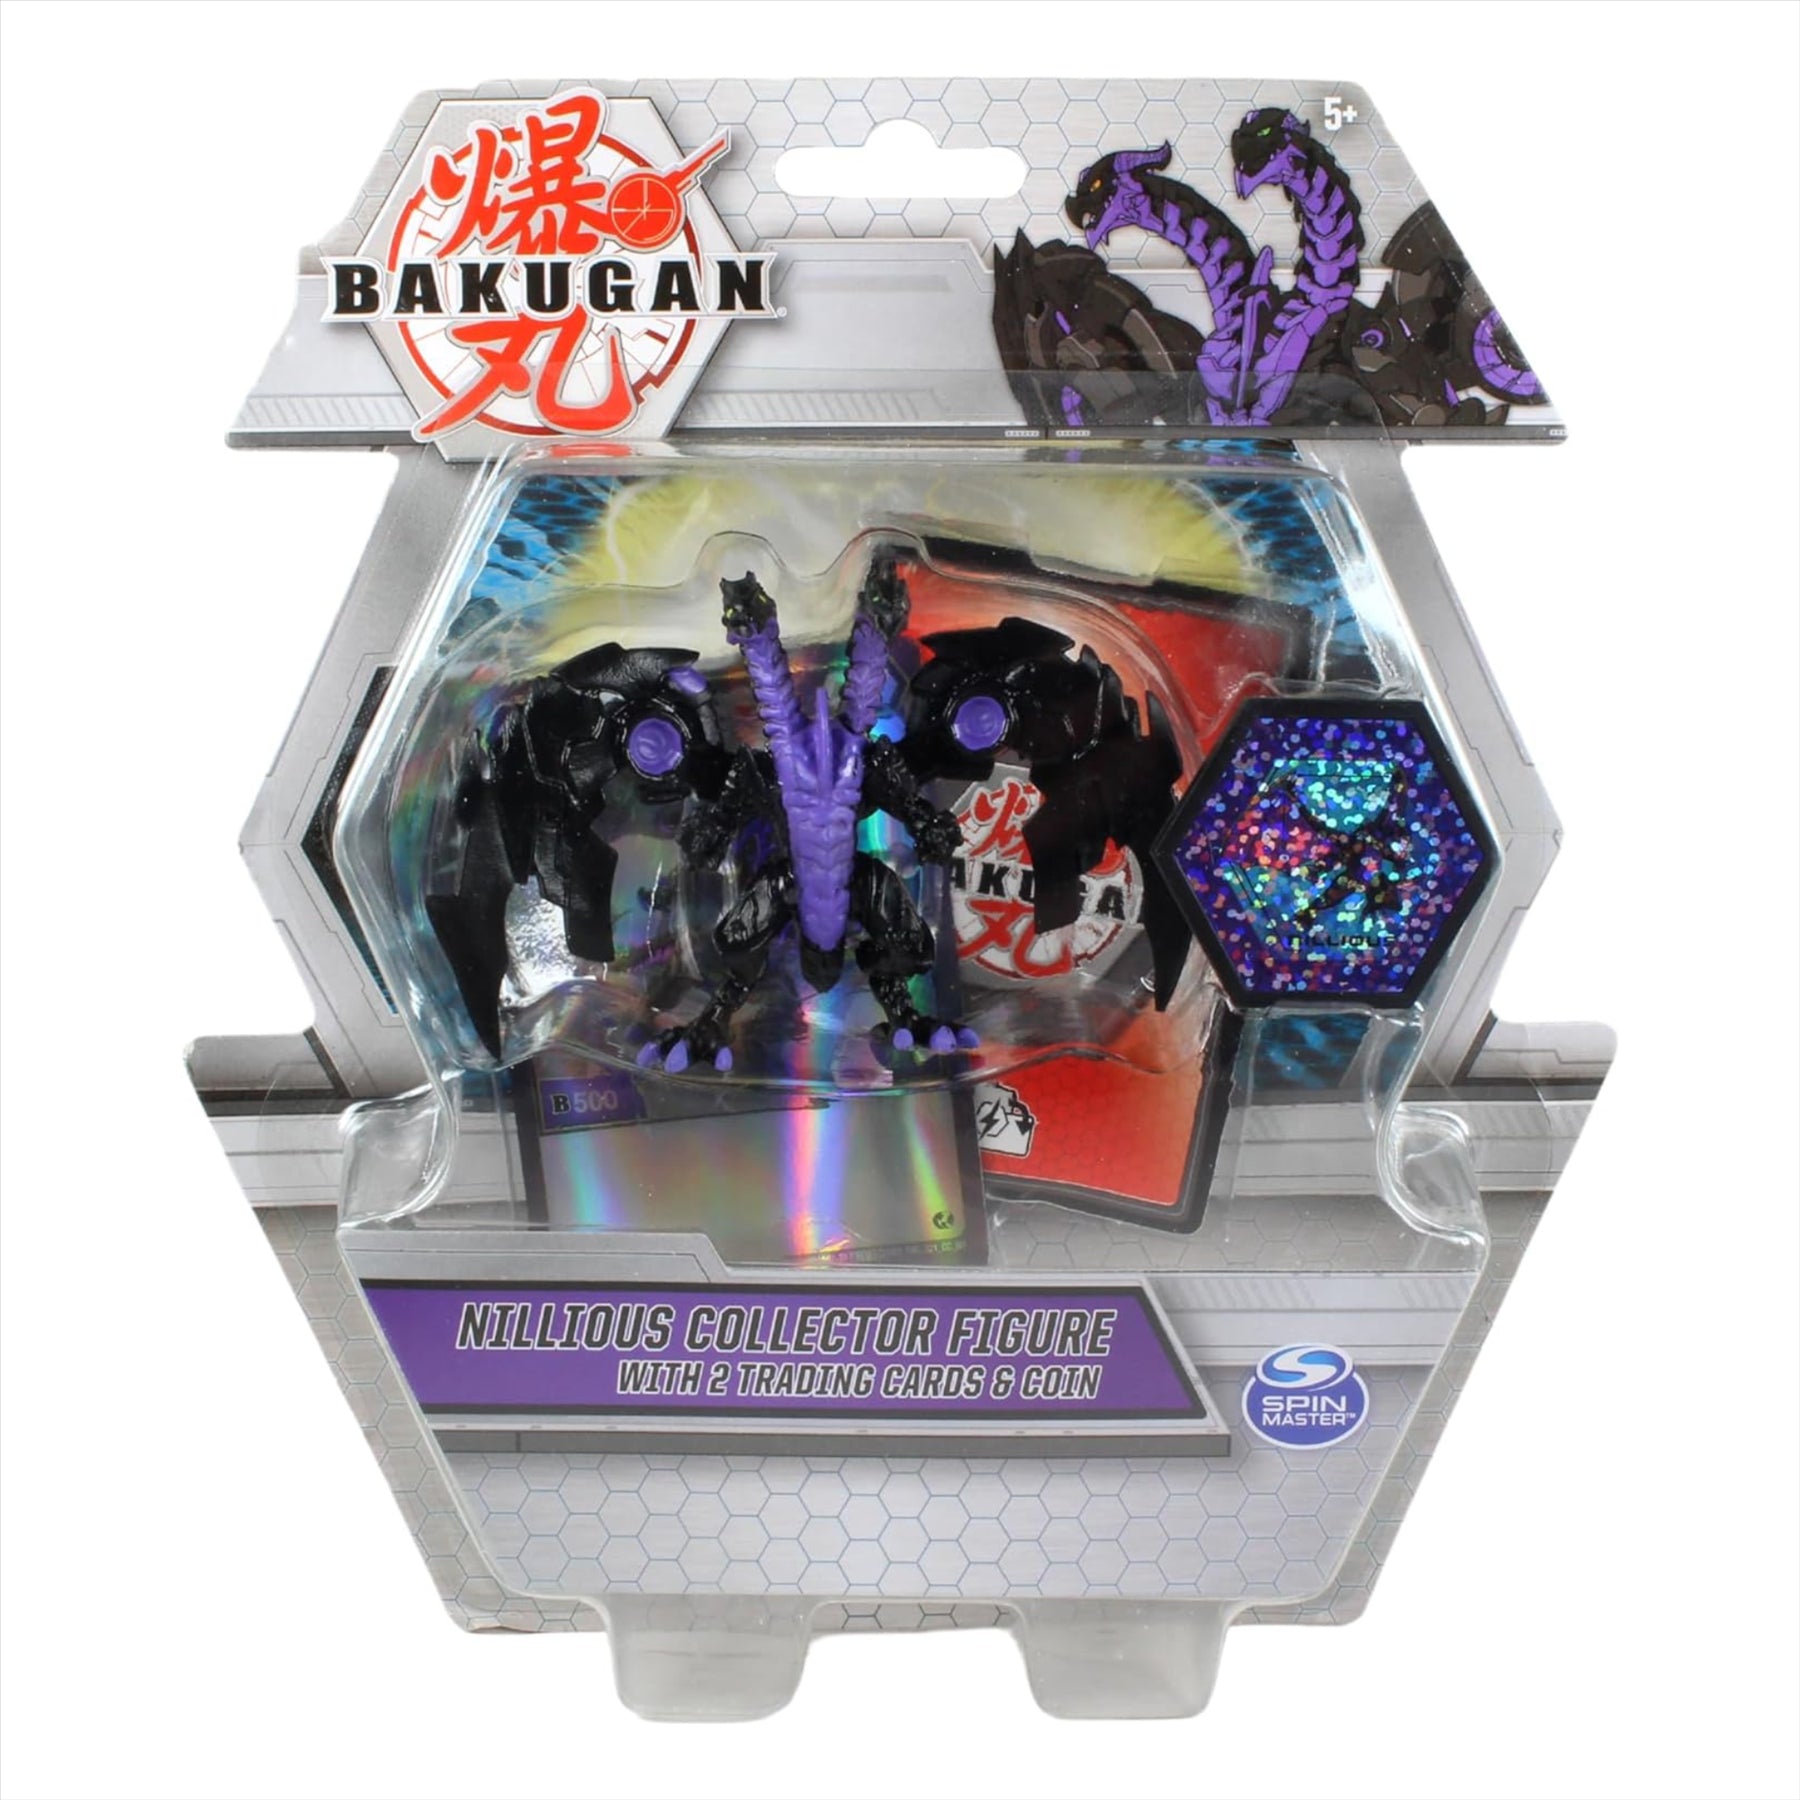 BAKUGAN - Nillious Purple Collector Figure With 2 Trading Cards & Collectors Coin - Toptoys2u